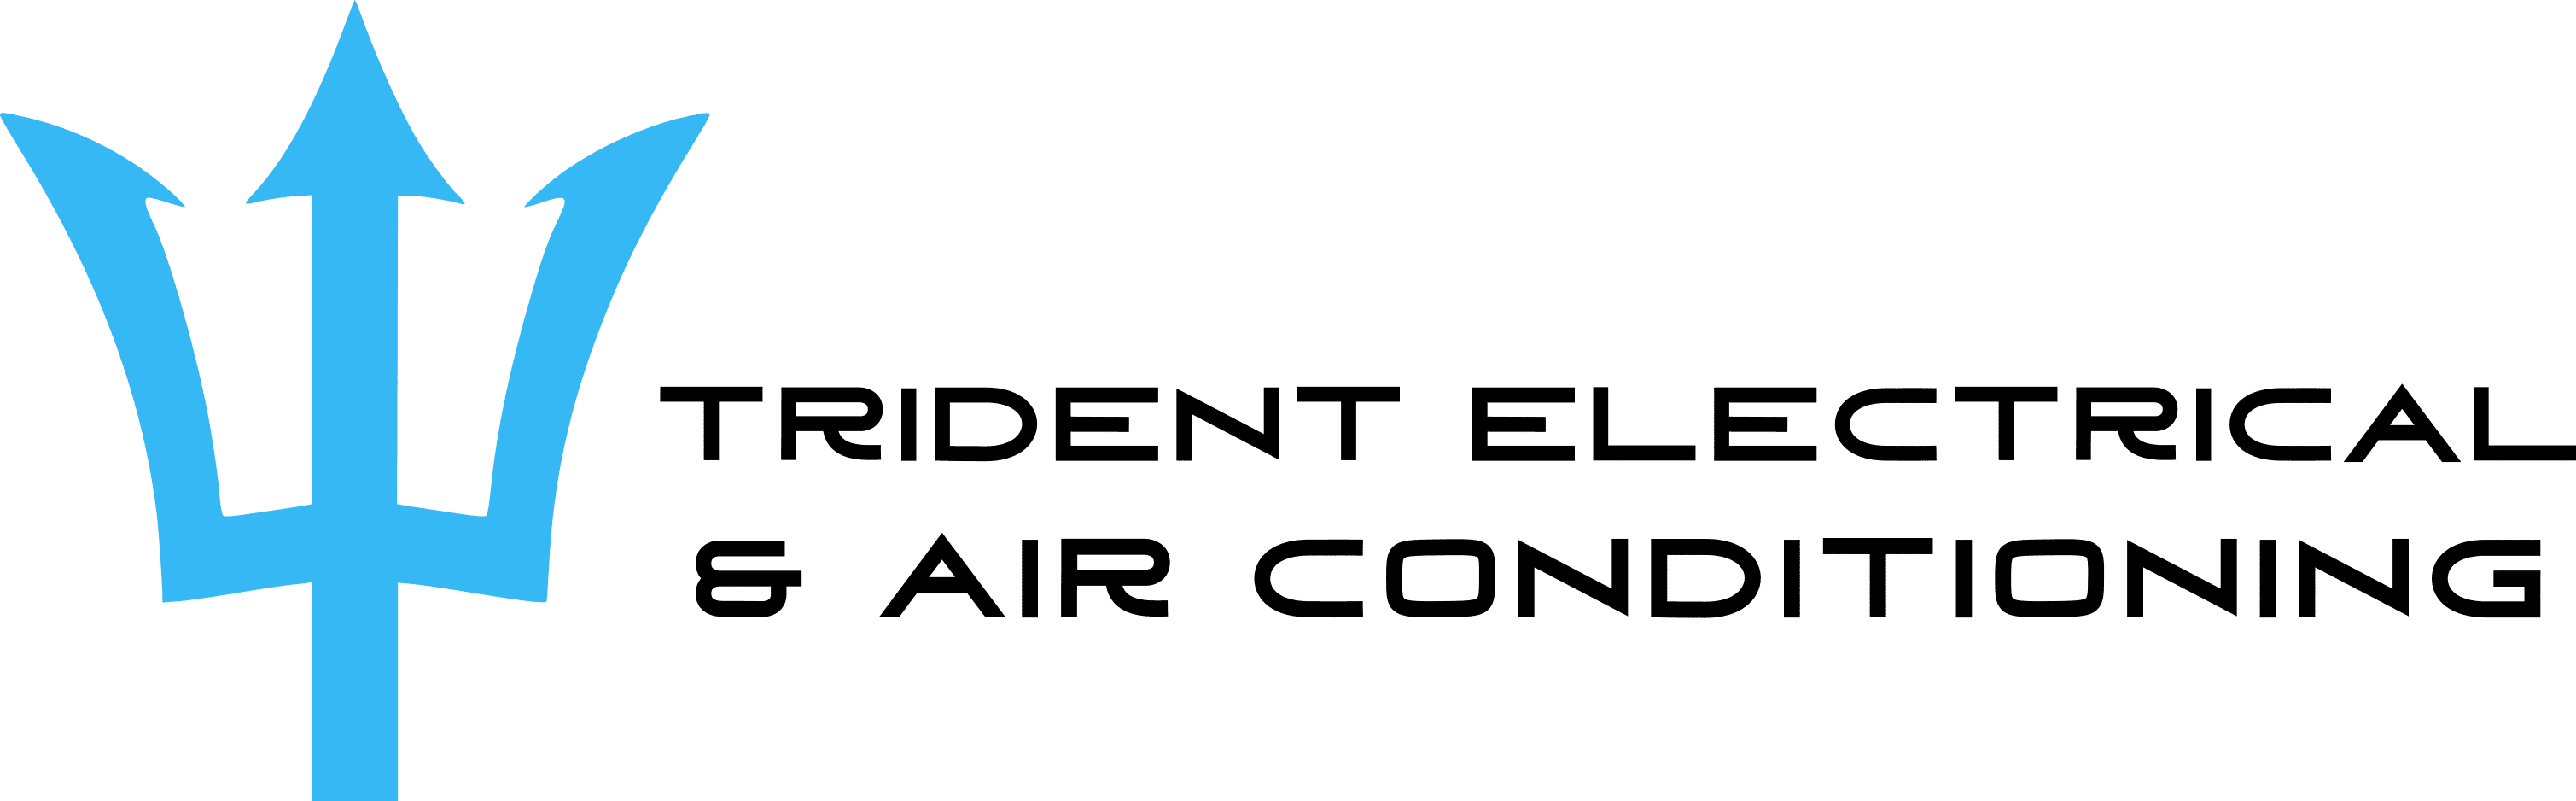 Trident Electrical & Air Conditioning Ltd